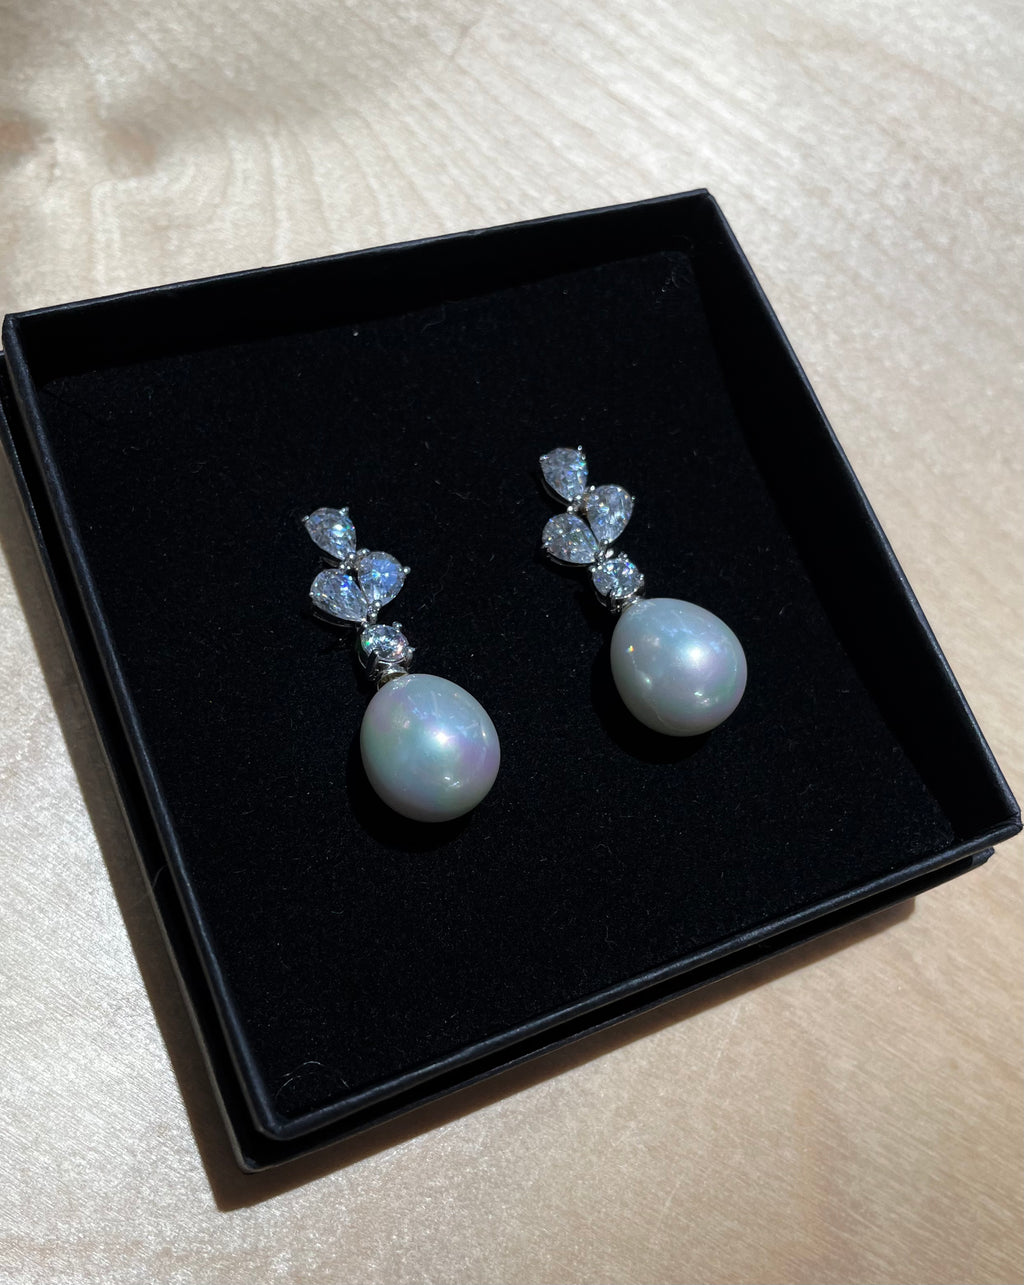 Voila - pearl earrings (Wedding pearl with crystals)